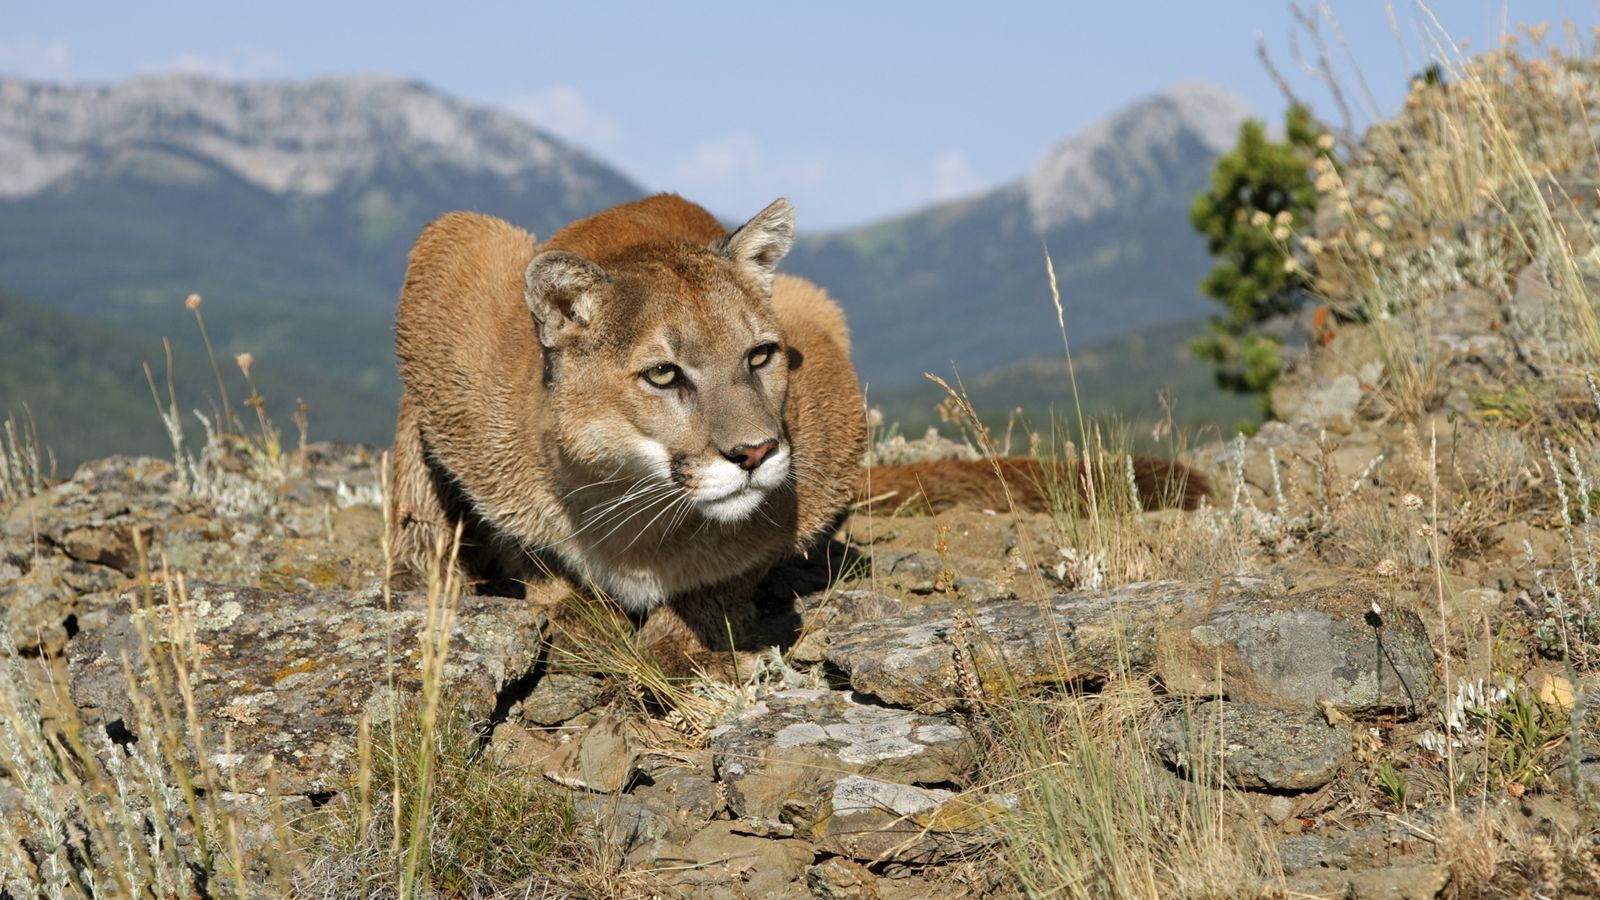 Mountain lion attacks two brothers, killing one and injuring the other